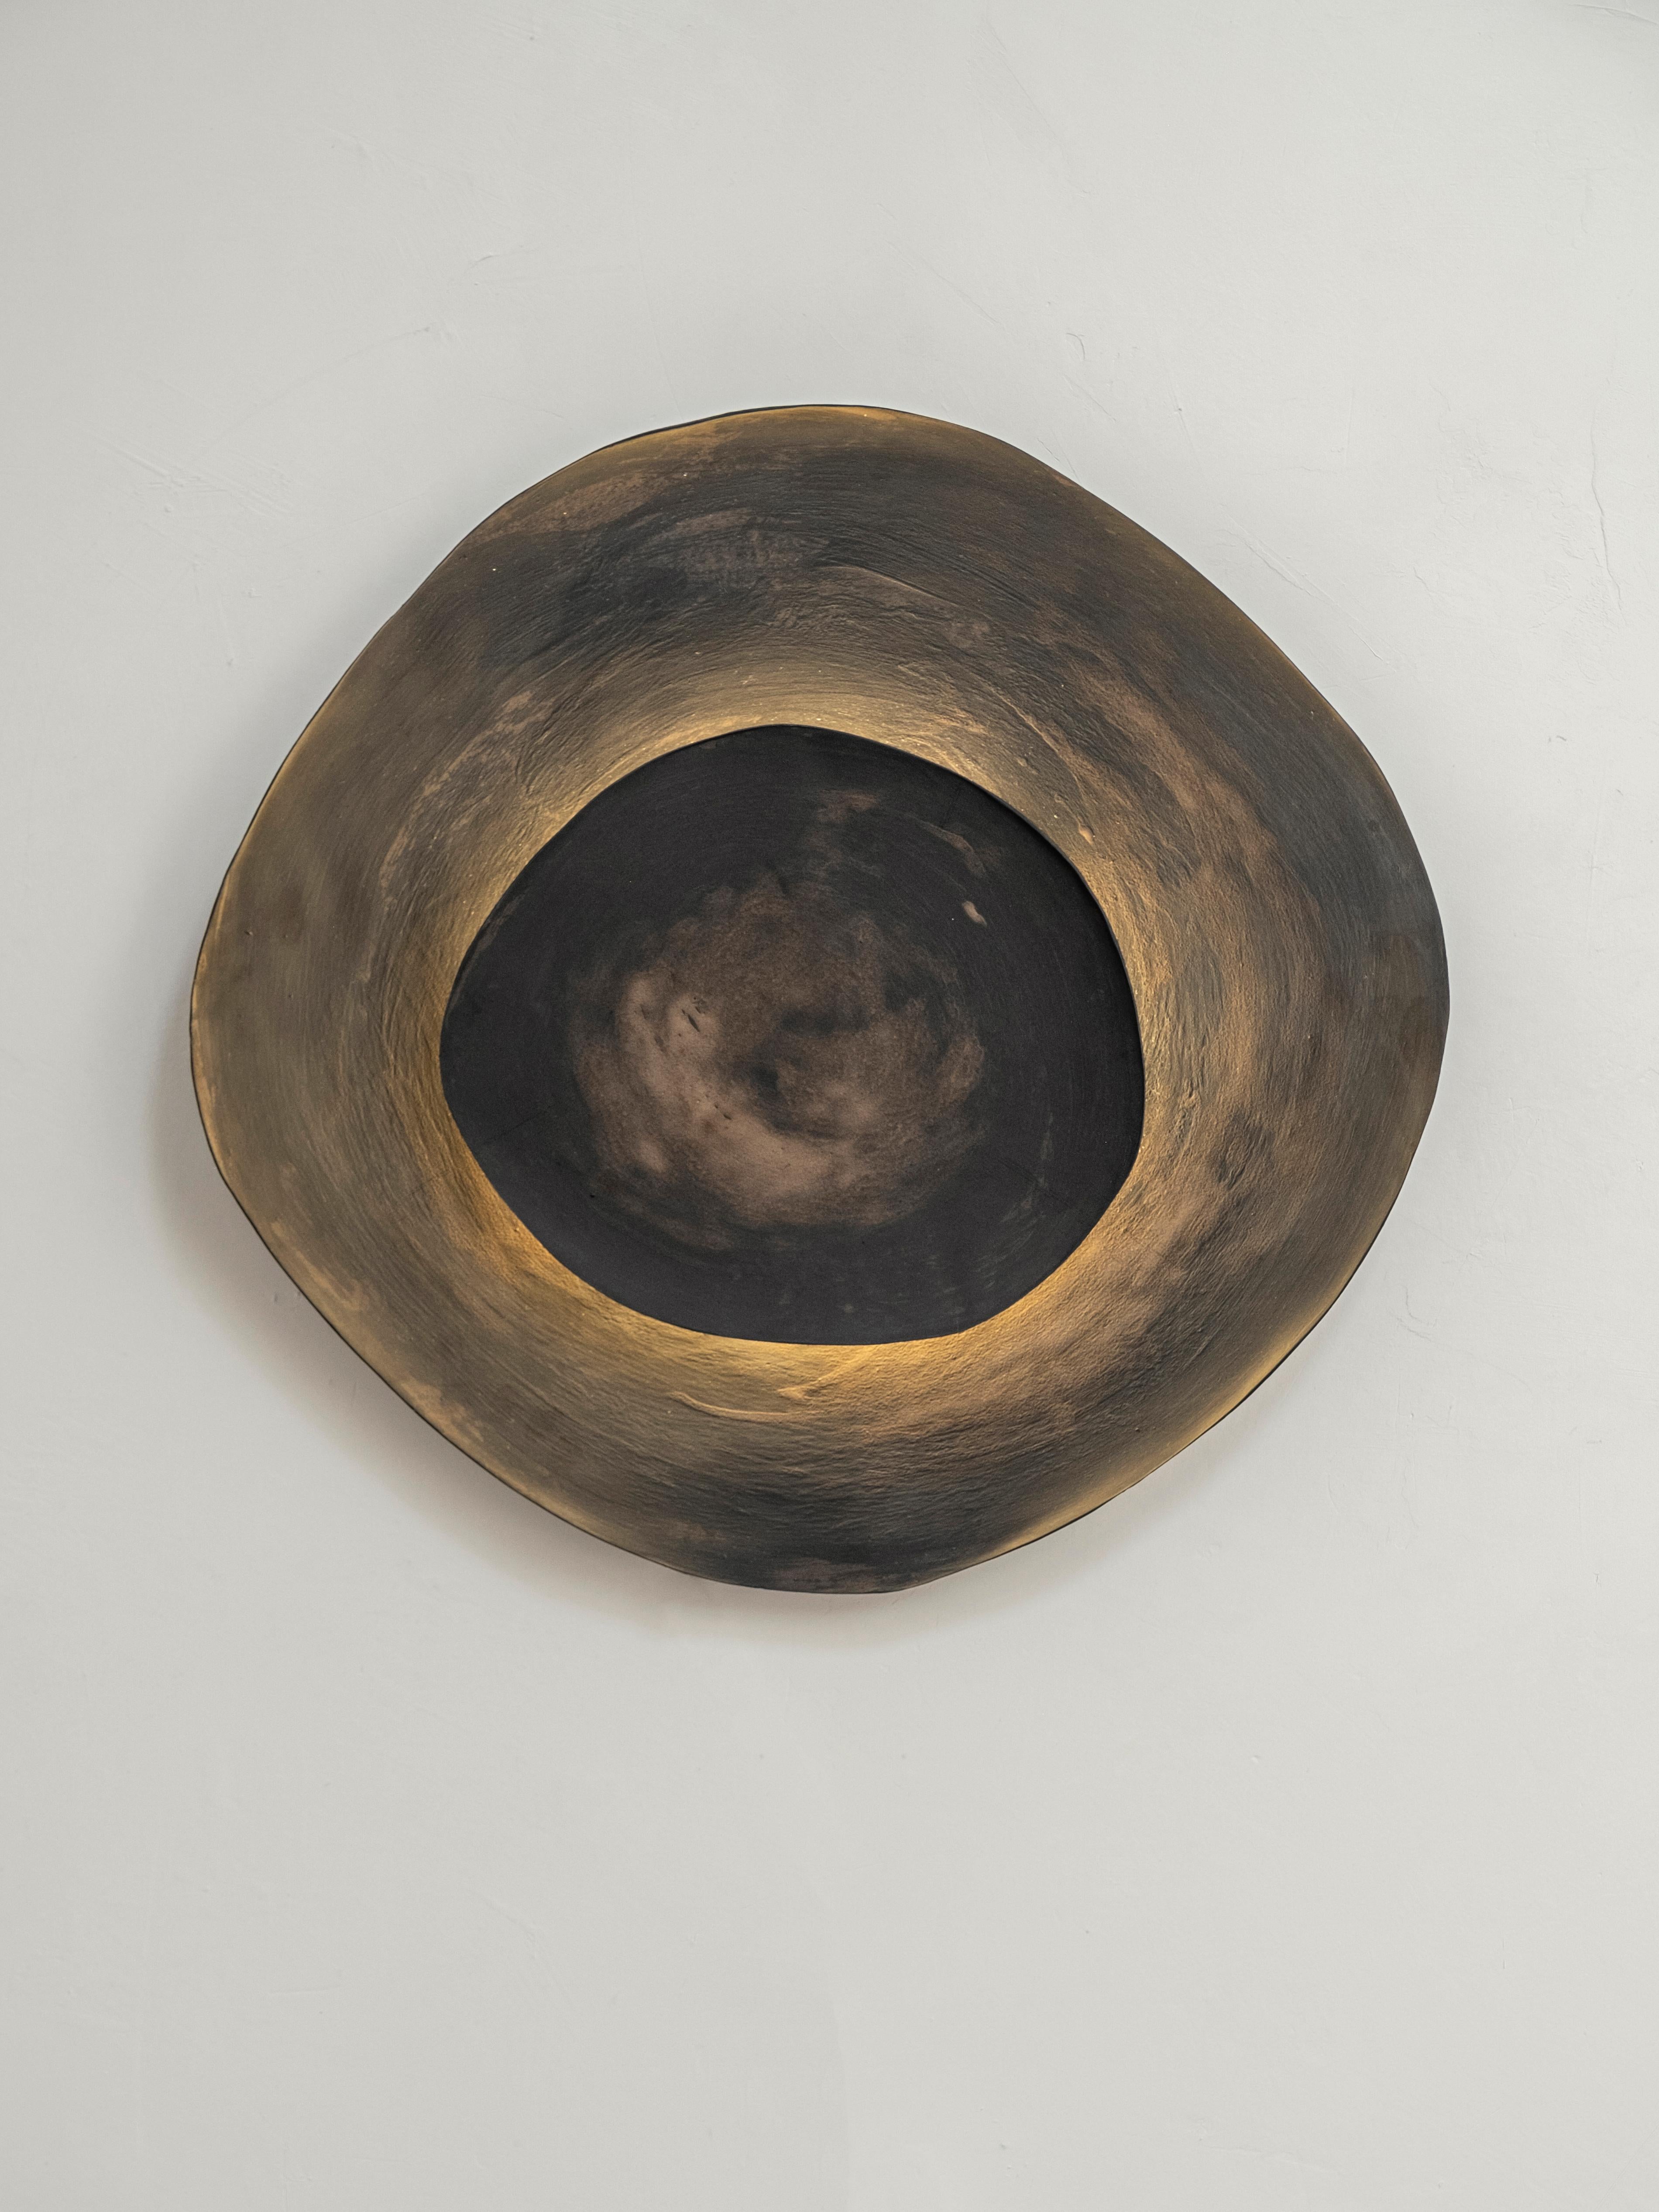 Ash #10 wall light by Margaux Leycuras.
One of a Kind, Signed and numbered.
Dimensions: Ø44 x H41 cm.
Material: Ceramic, black stoneware with burnished gold glaze.
The piece is signed, numbered and delivered with a certificate of